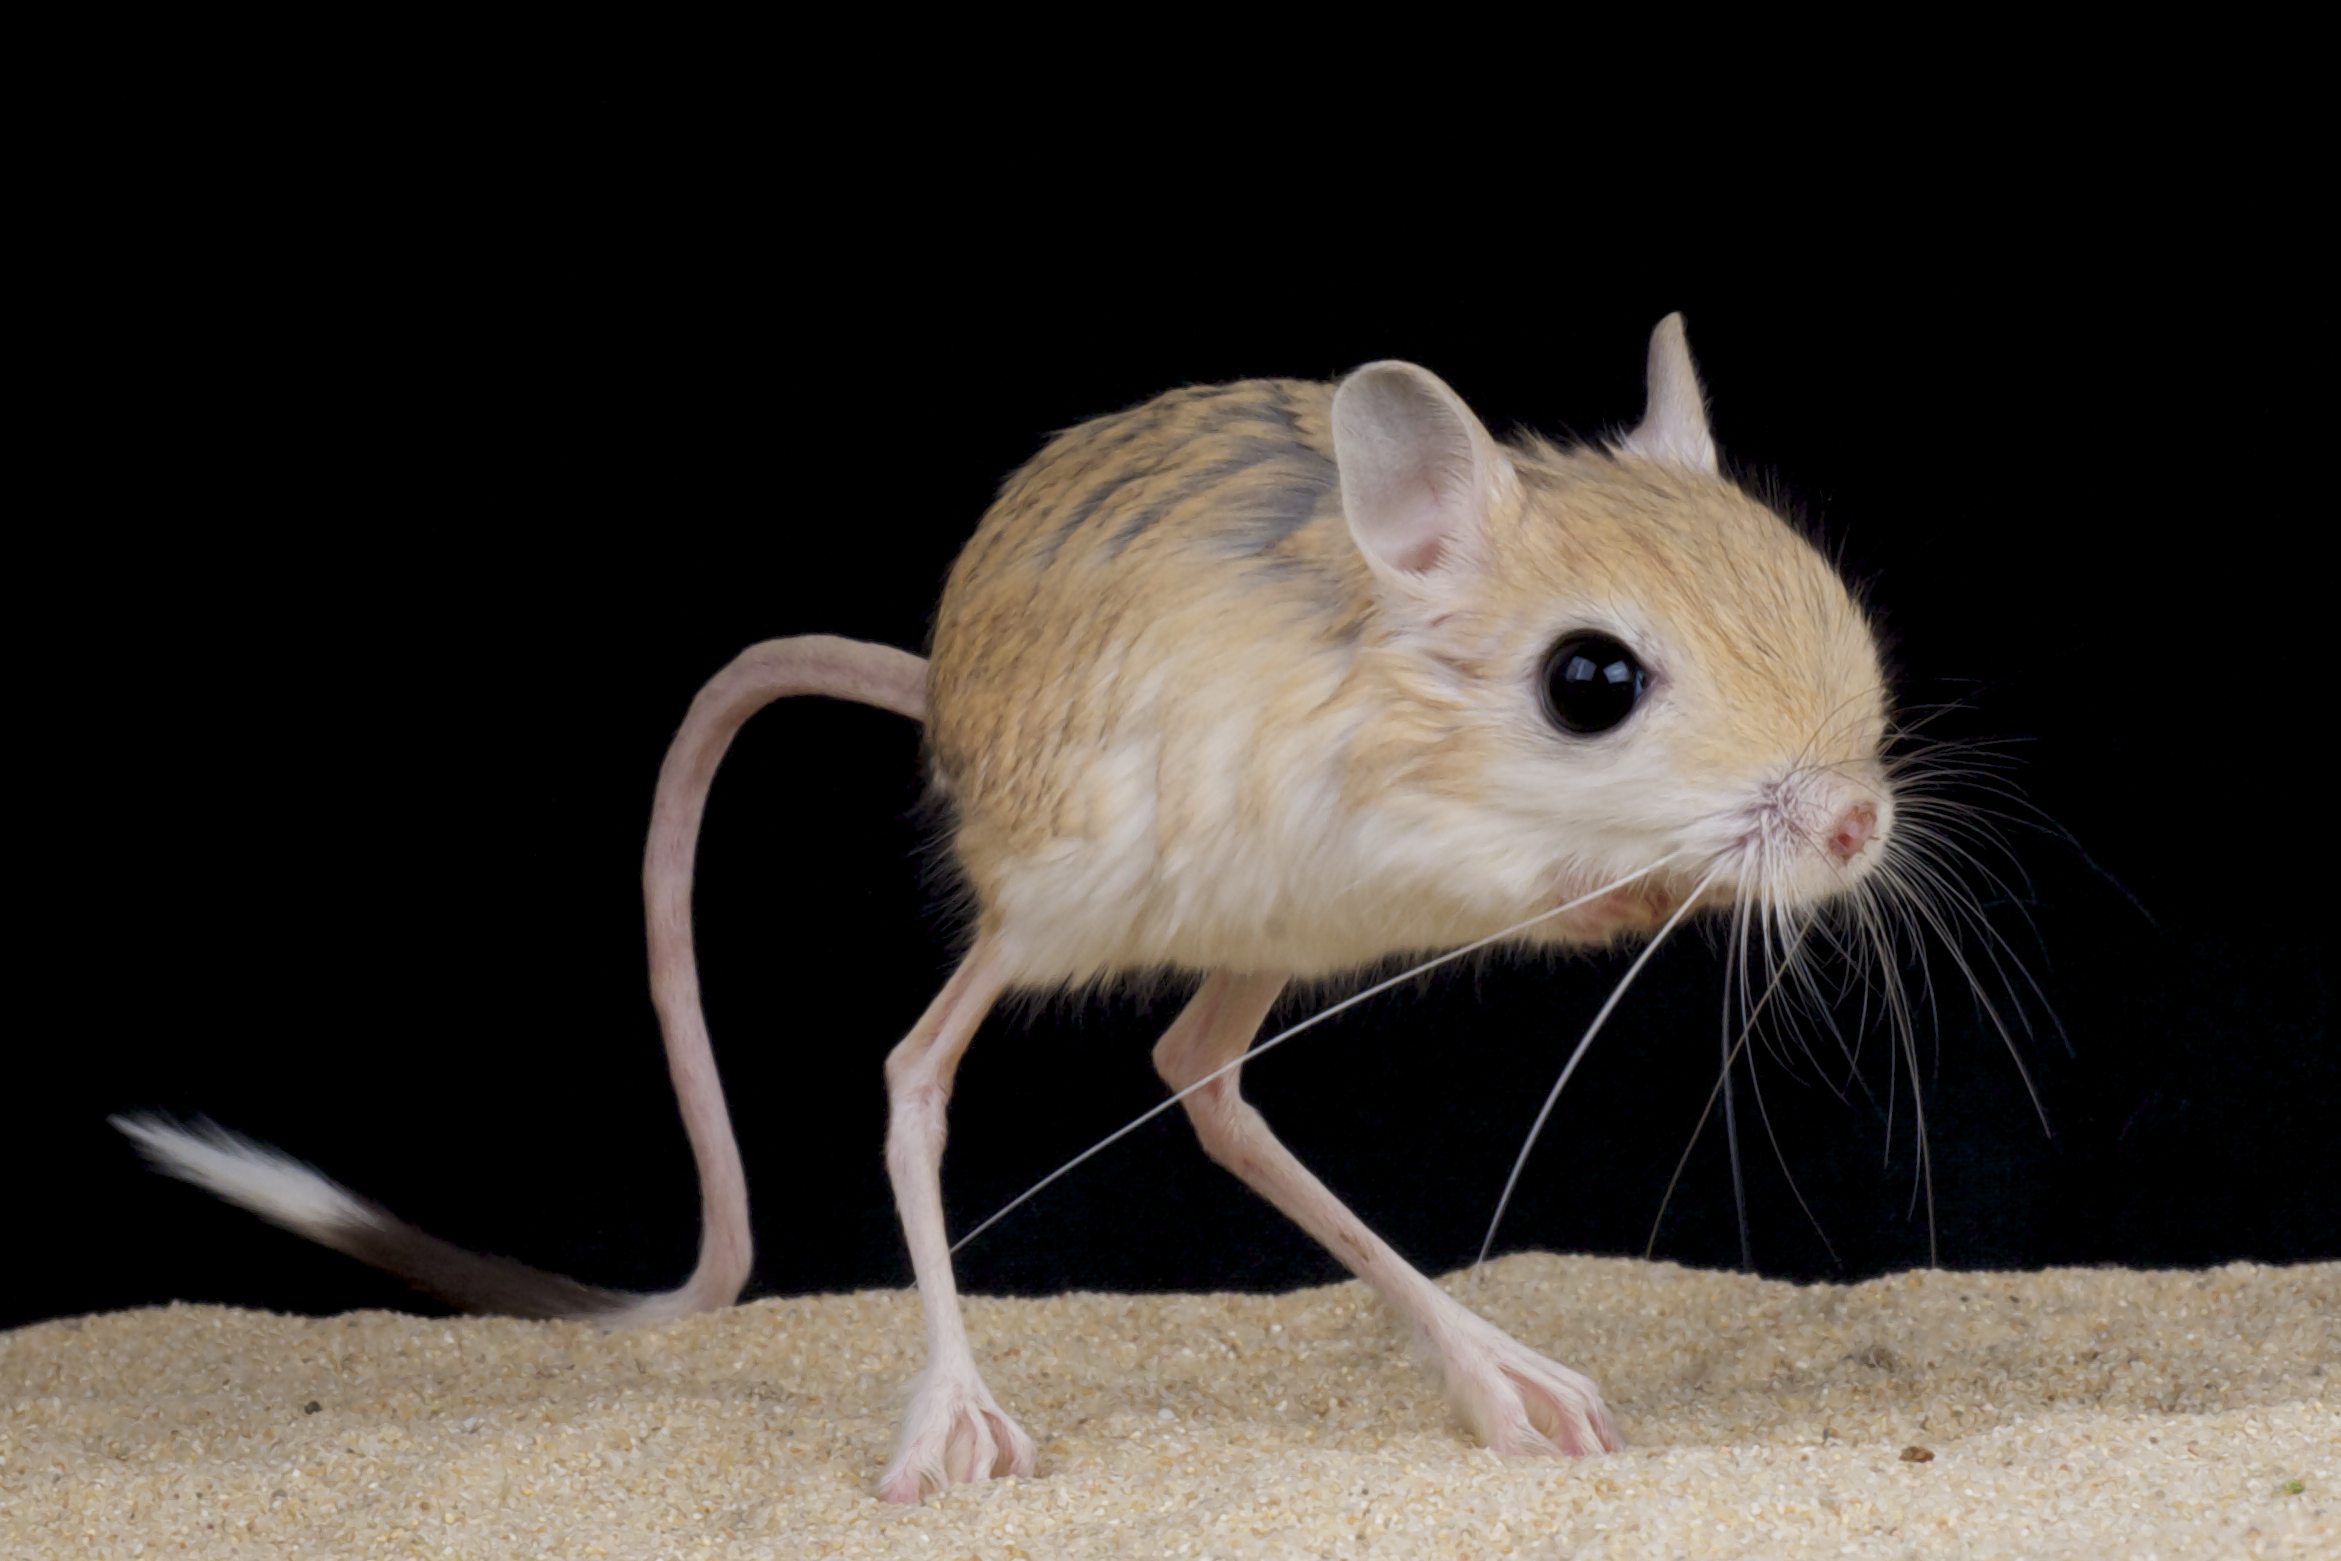 The Jerboa is a medium-sized rodent with kangaroo-like legs